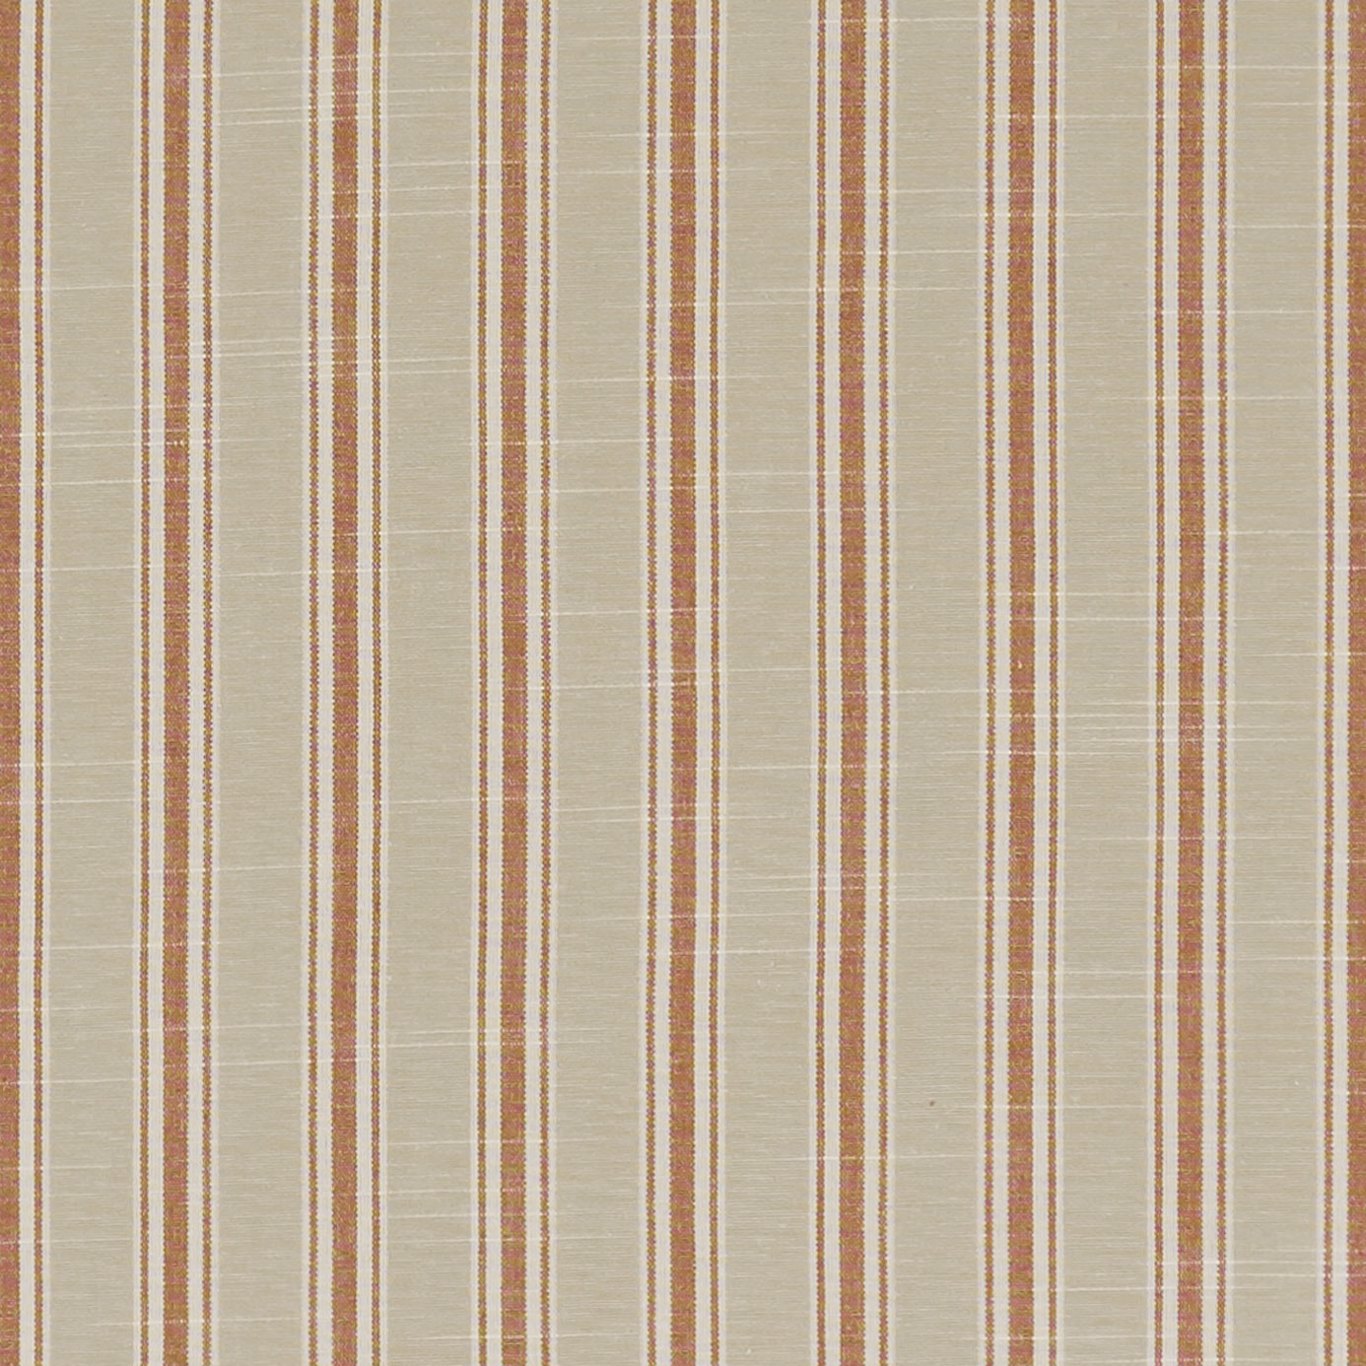 Thornwick Spice Fabric by STG